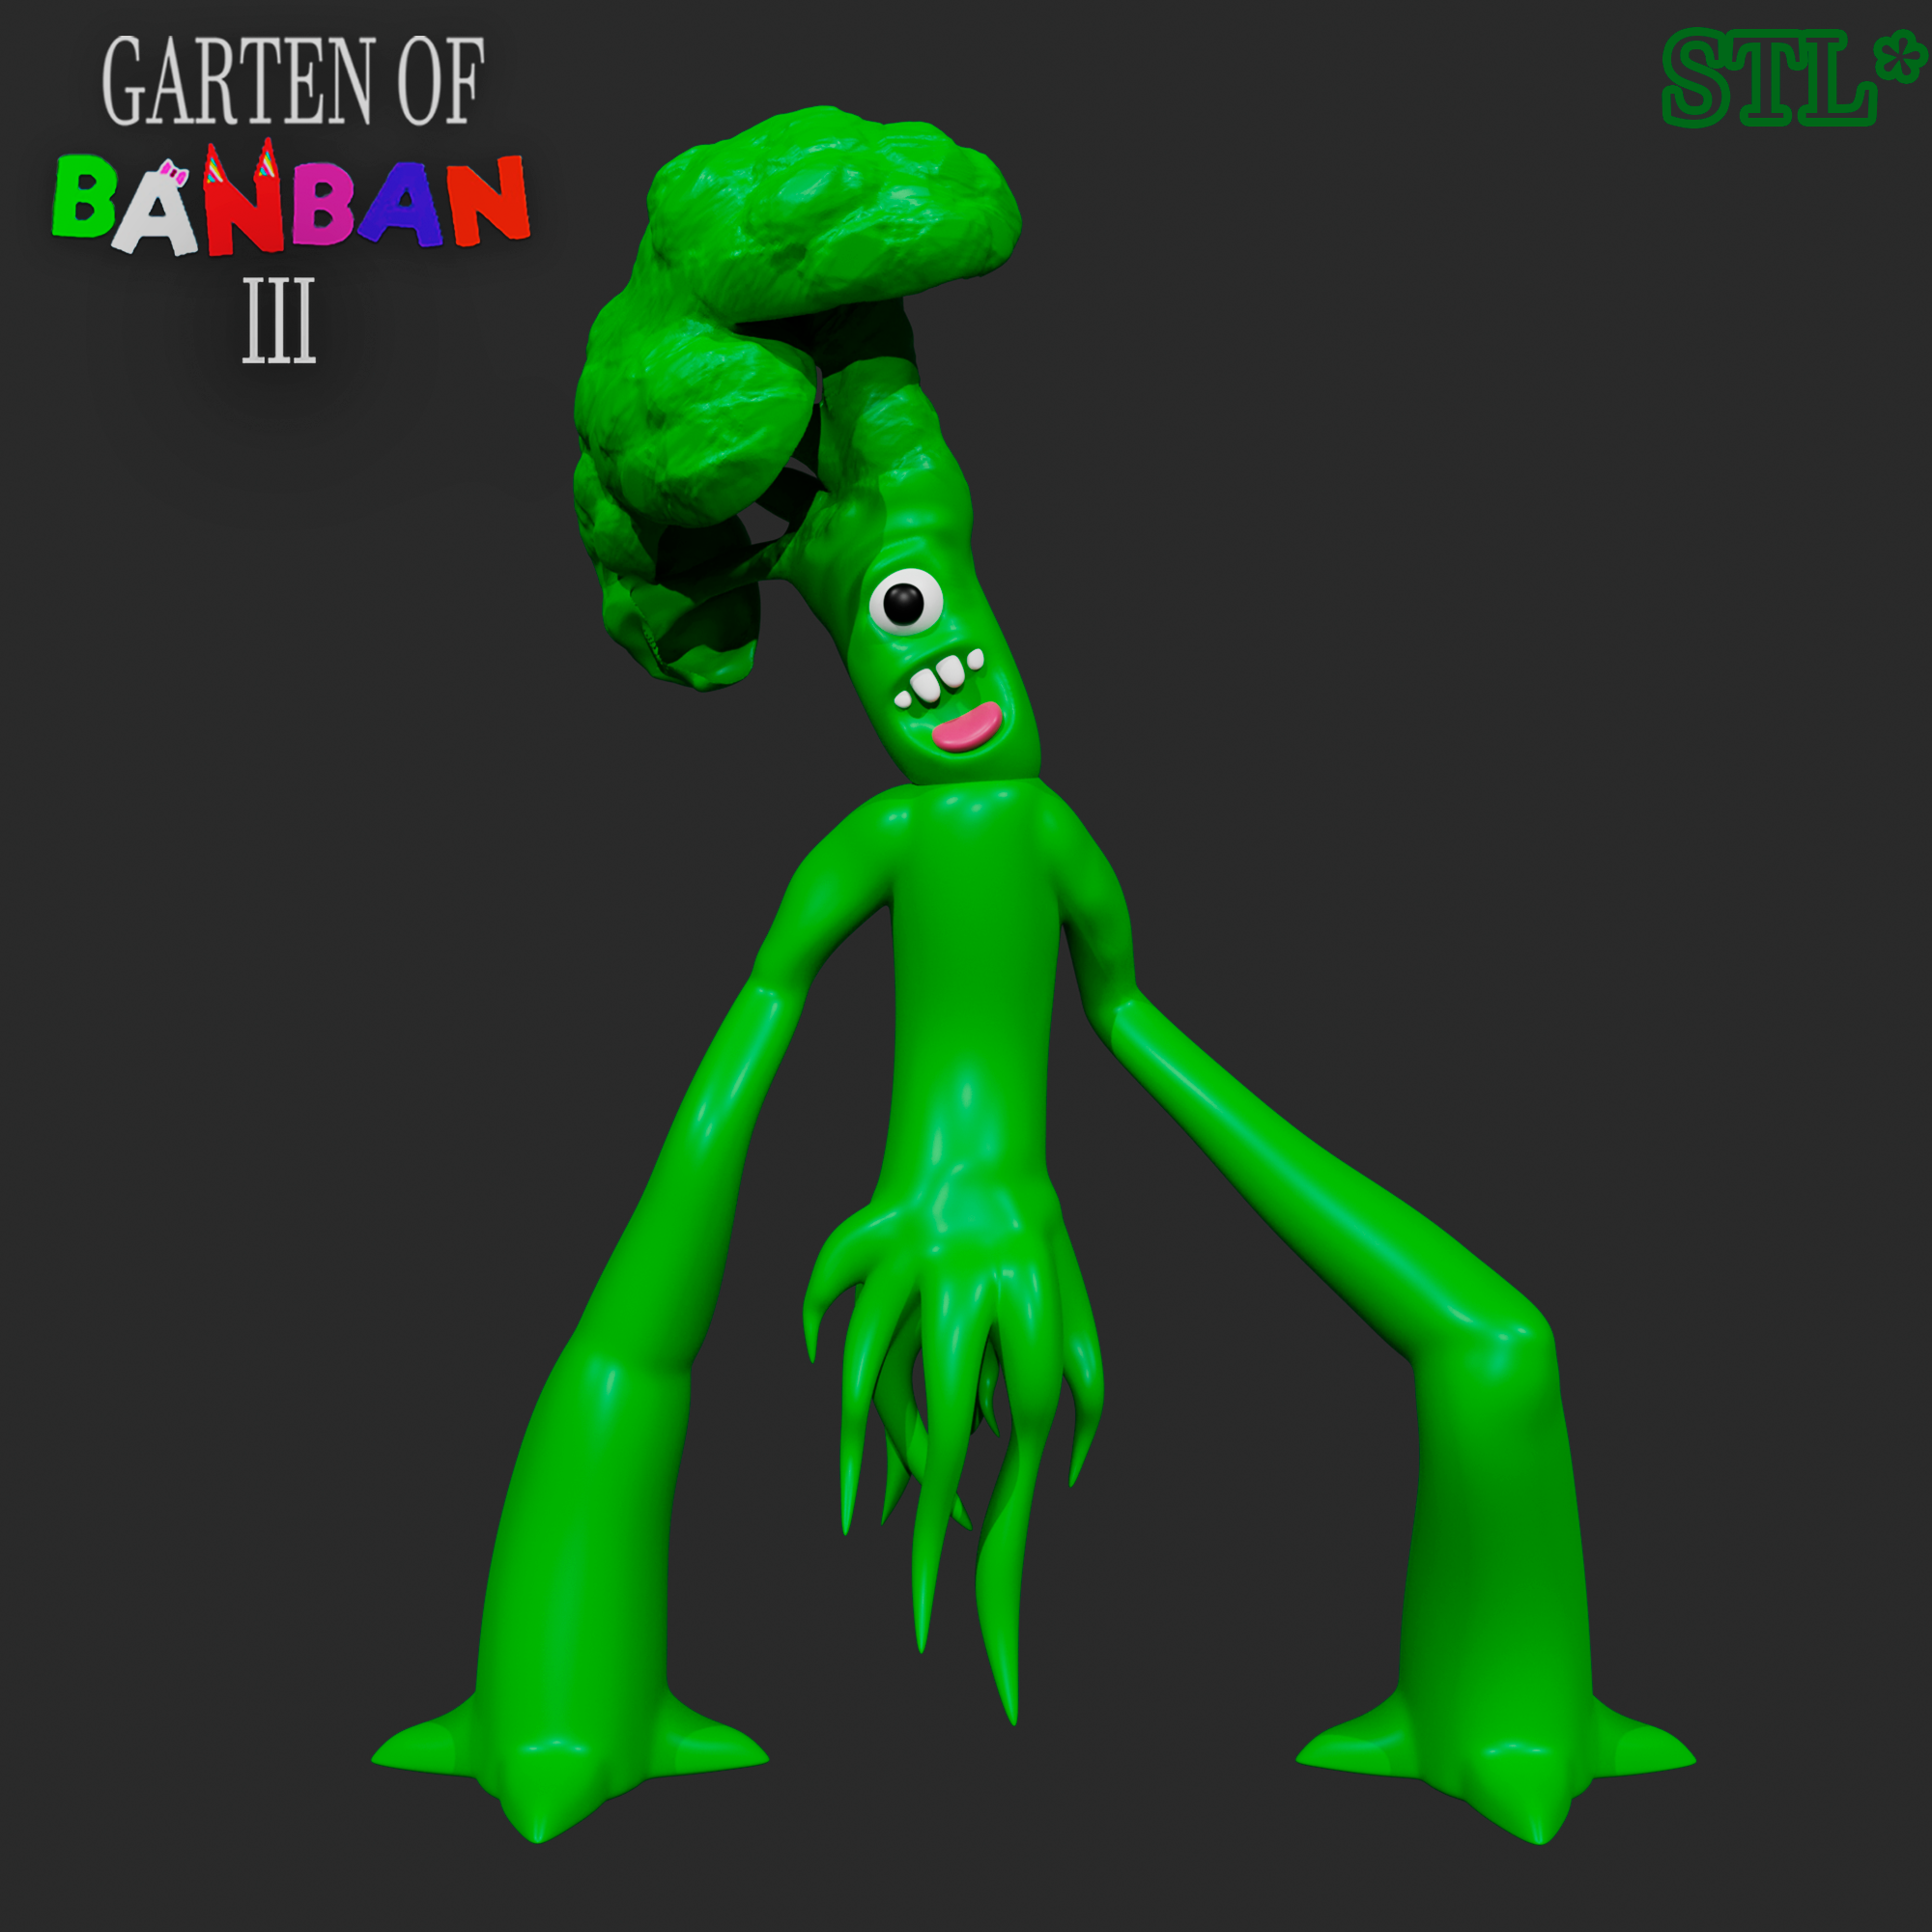 STL file TALL VIKTOR FROM GARTEN OF BANBAN 3 NEW MONSTERS. FAN ART. BGGT・3D printing to download・Cults